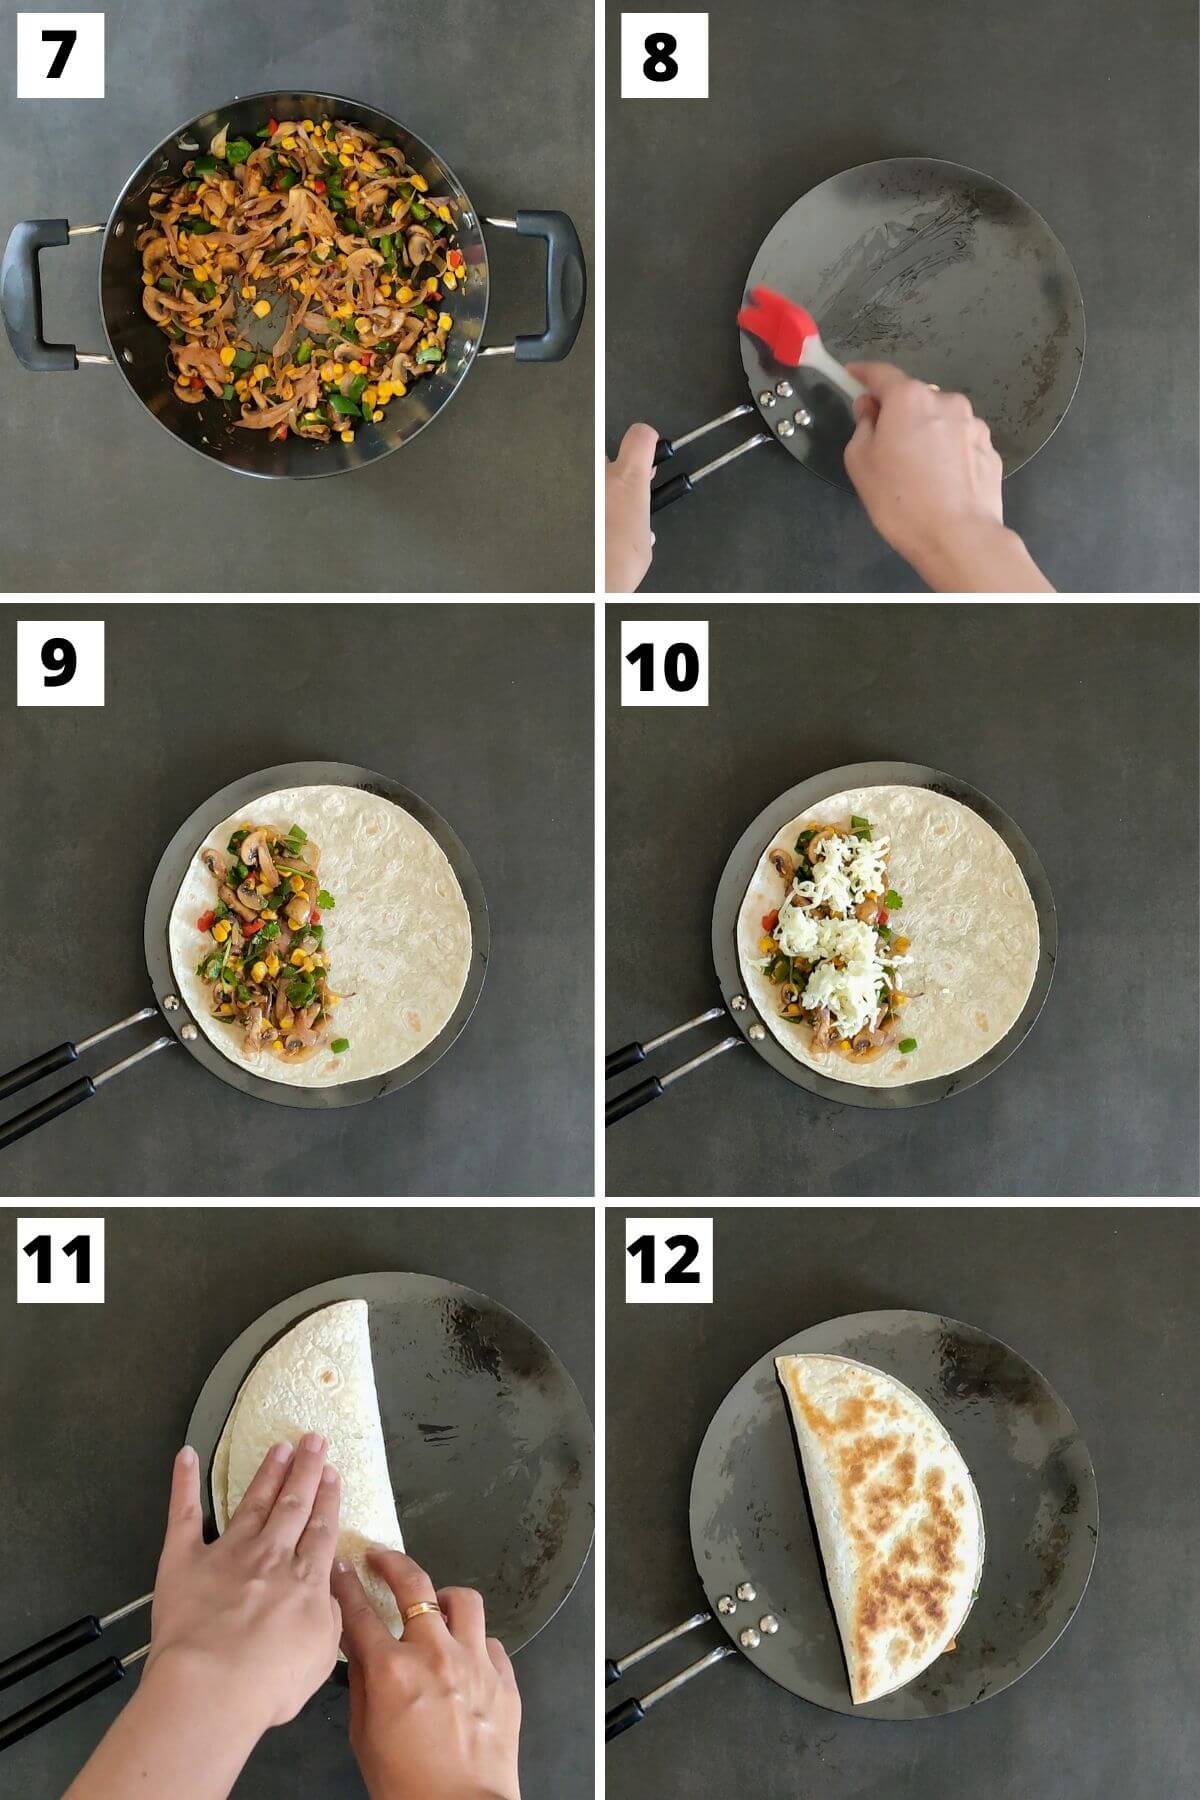 Collage of steps 7 to 12 of veggie quesadilla.